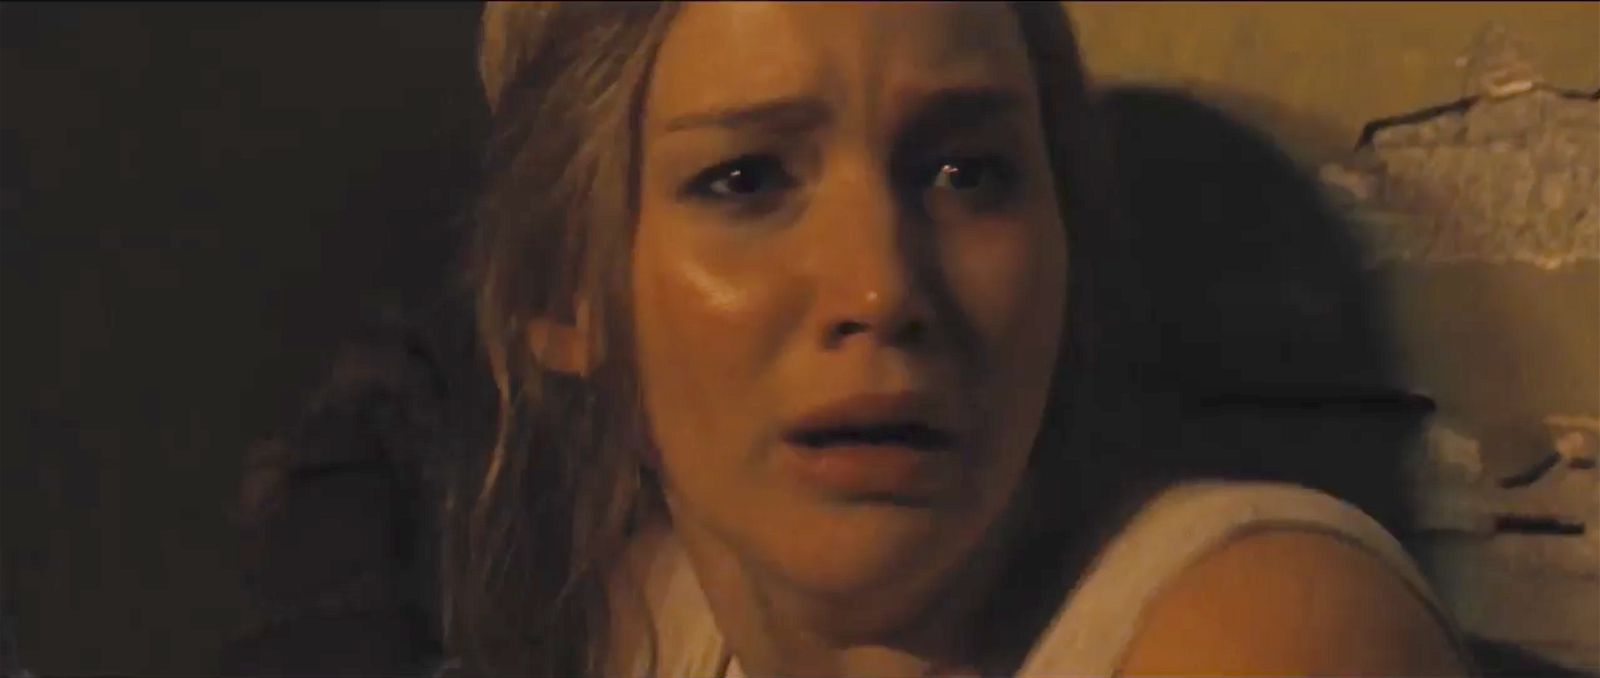 Jennifer Lawrence had another paranormal experience